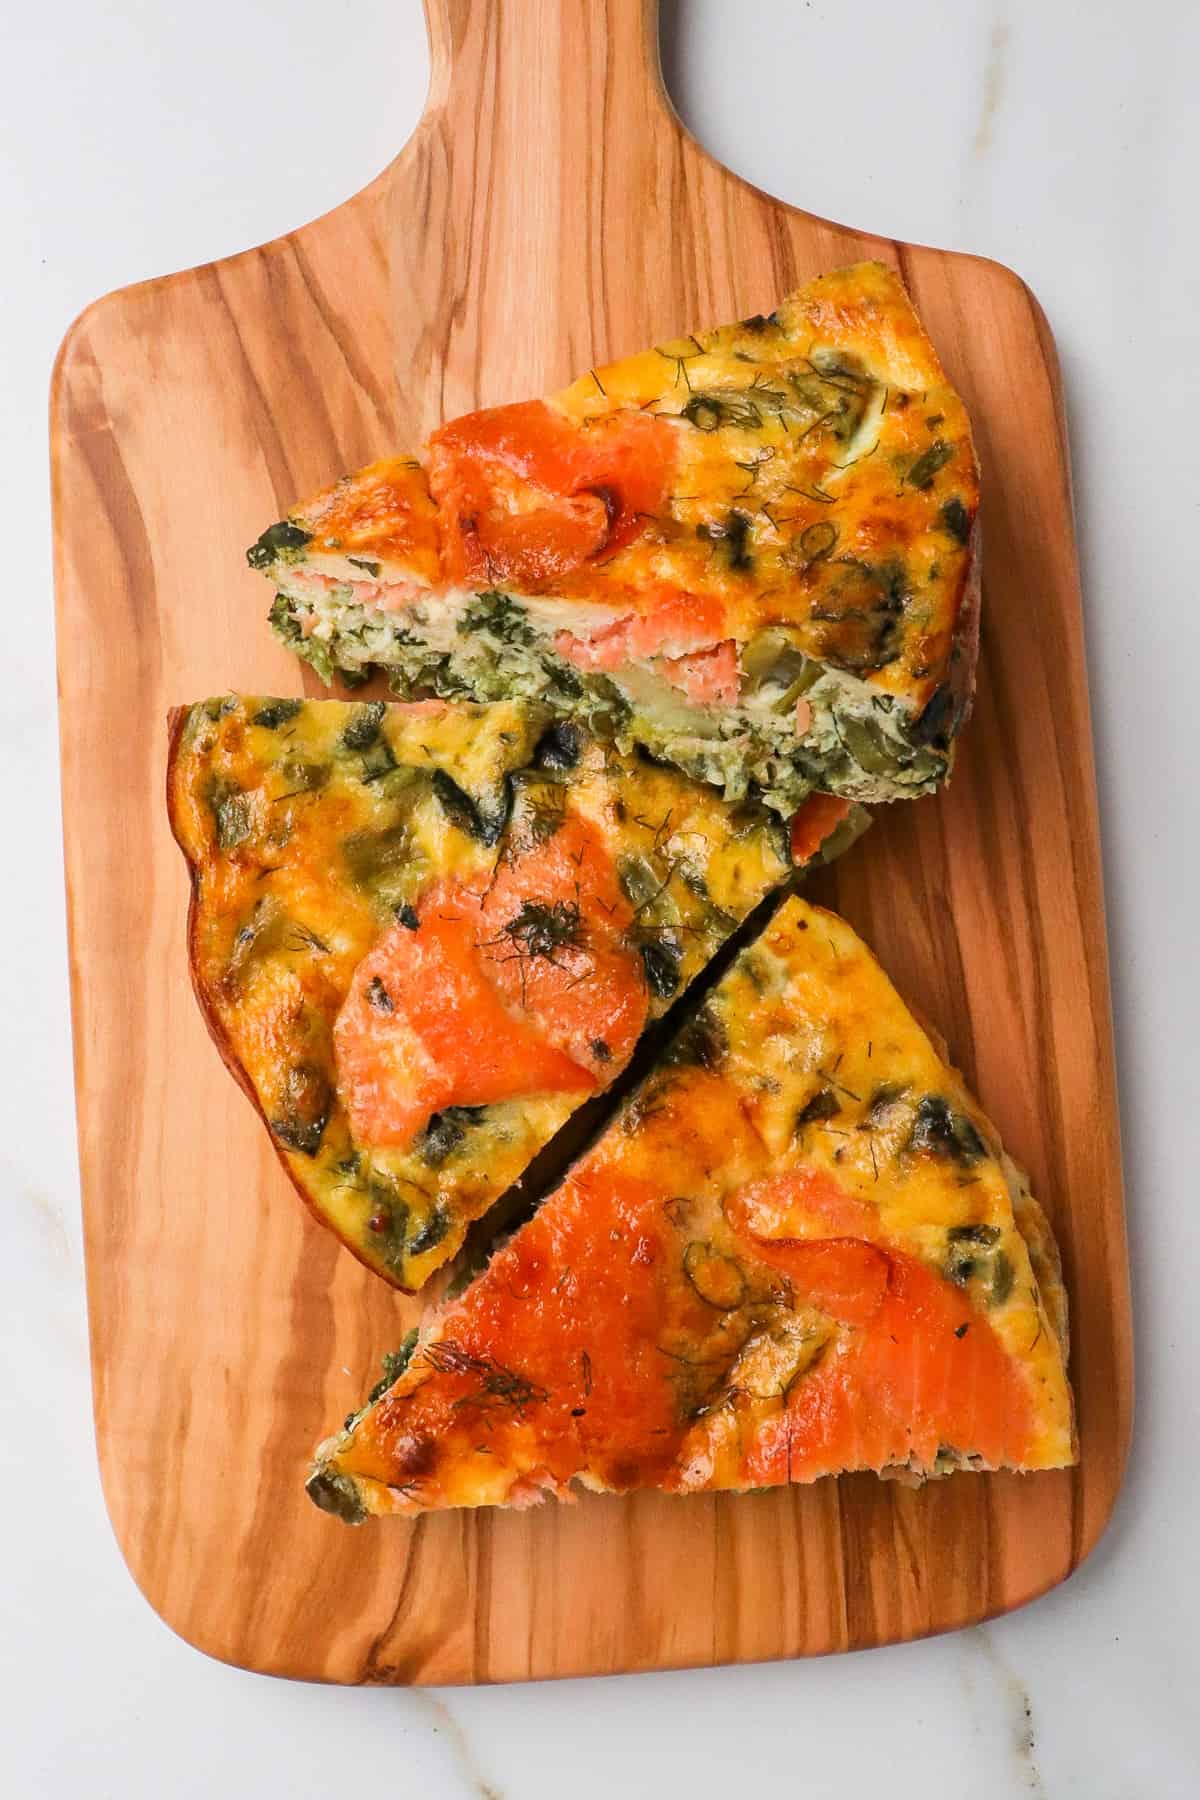 Slices of salmon spinach quiche on a wooden board.